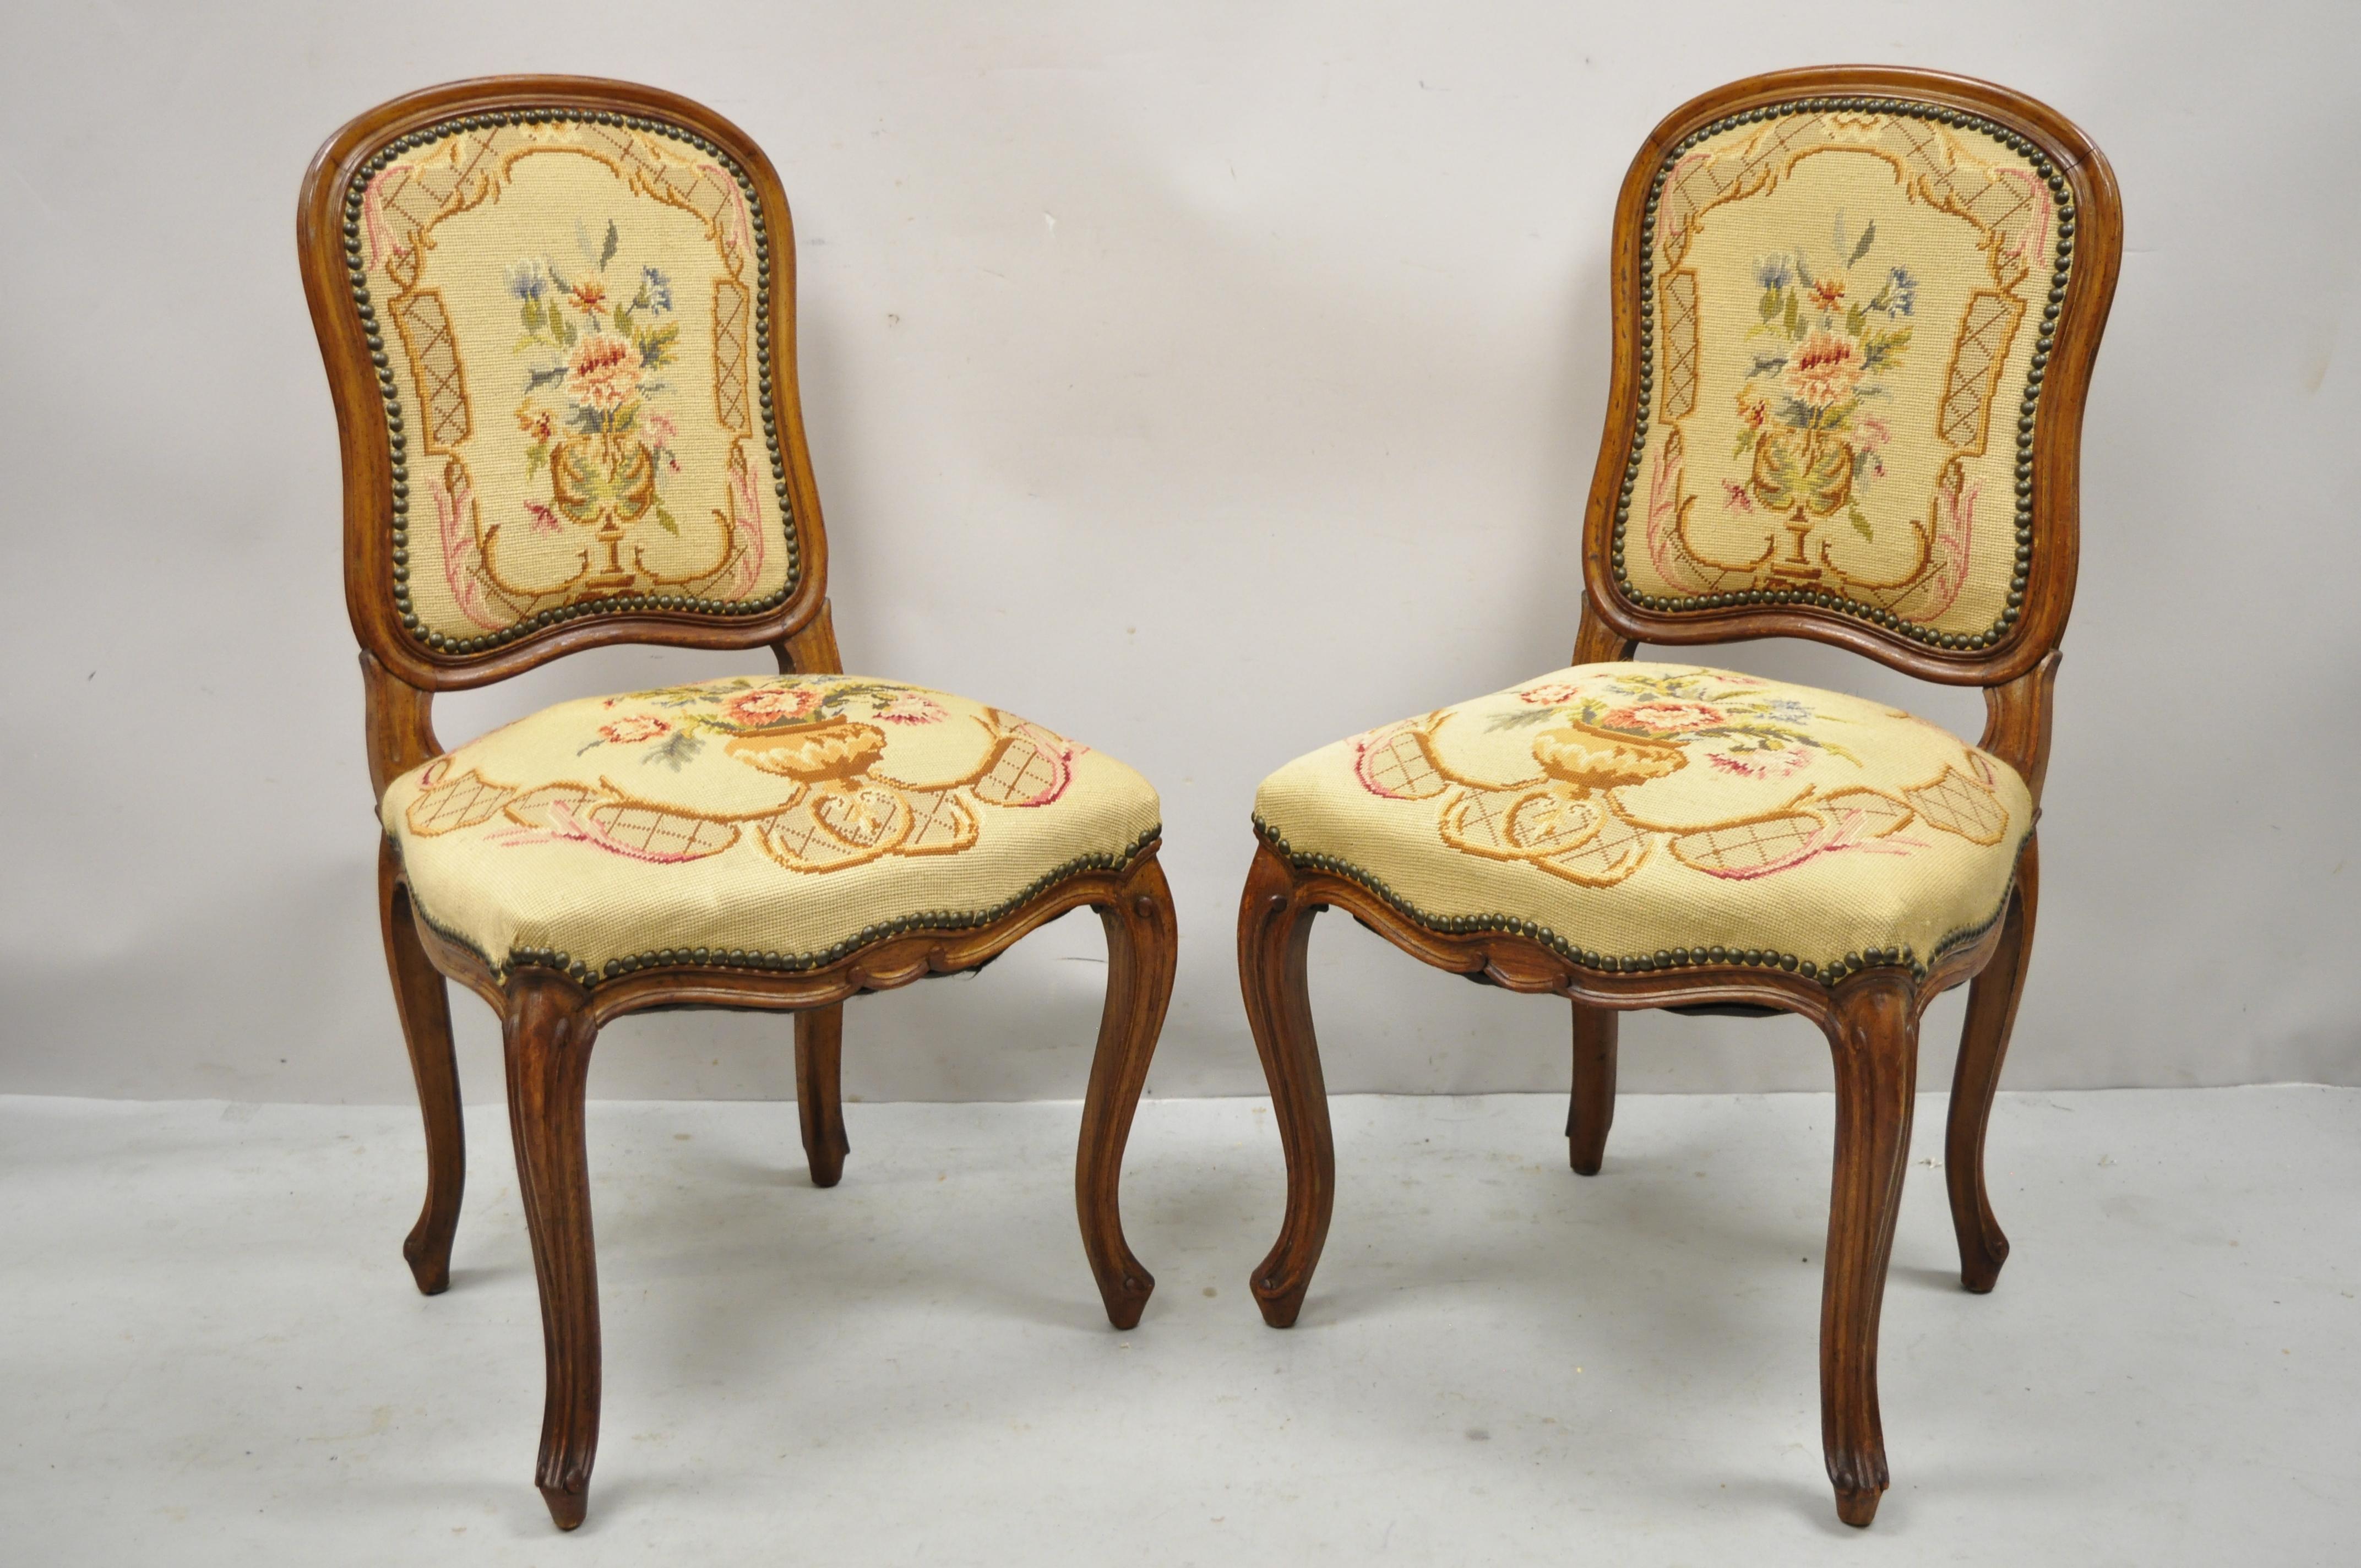 Antique French Provincial Louis XV carved walnut floral needlepoint side chairs - a Pair. Item features needlepoint upholstered back and seat, shaped backs, solid wood frame, beautiful wood grain, nicely carved details, cabriole legs, very nice